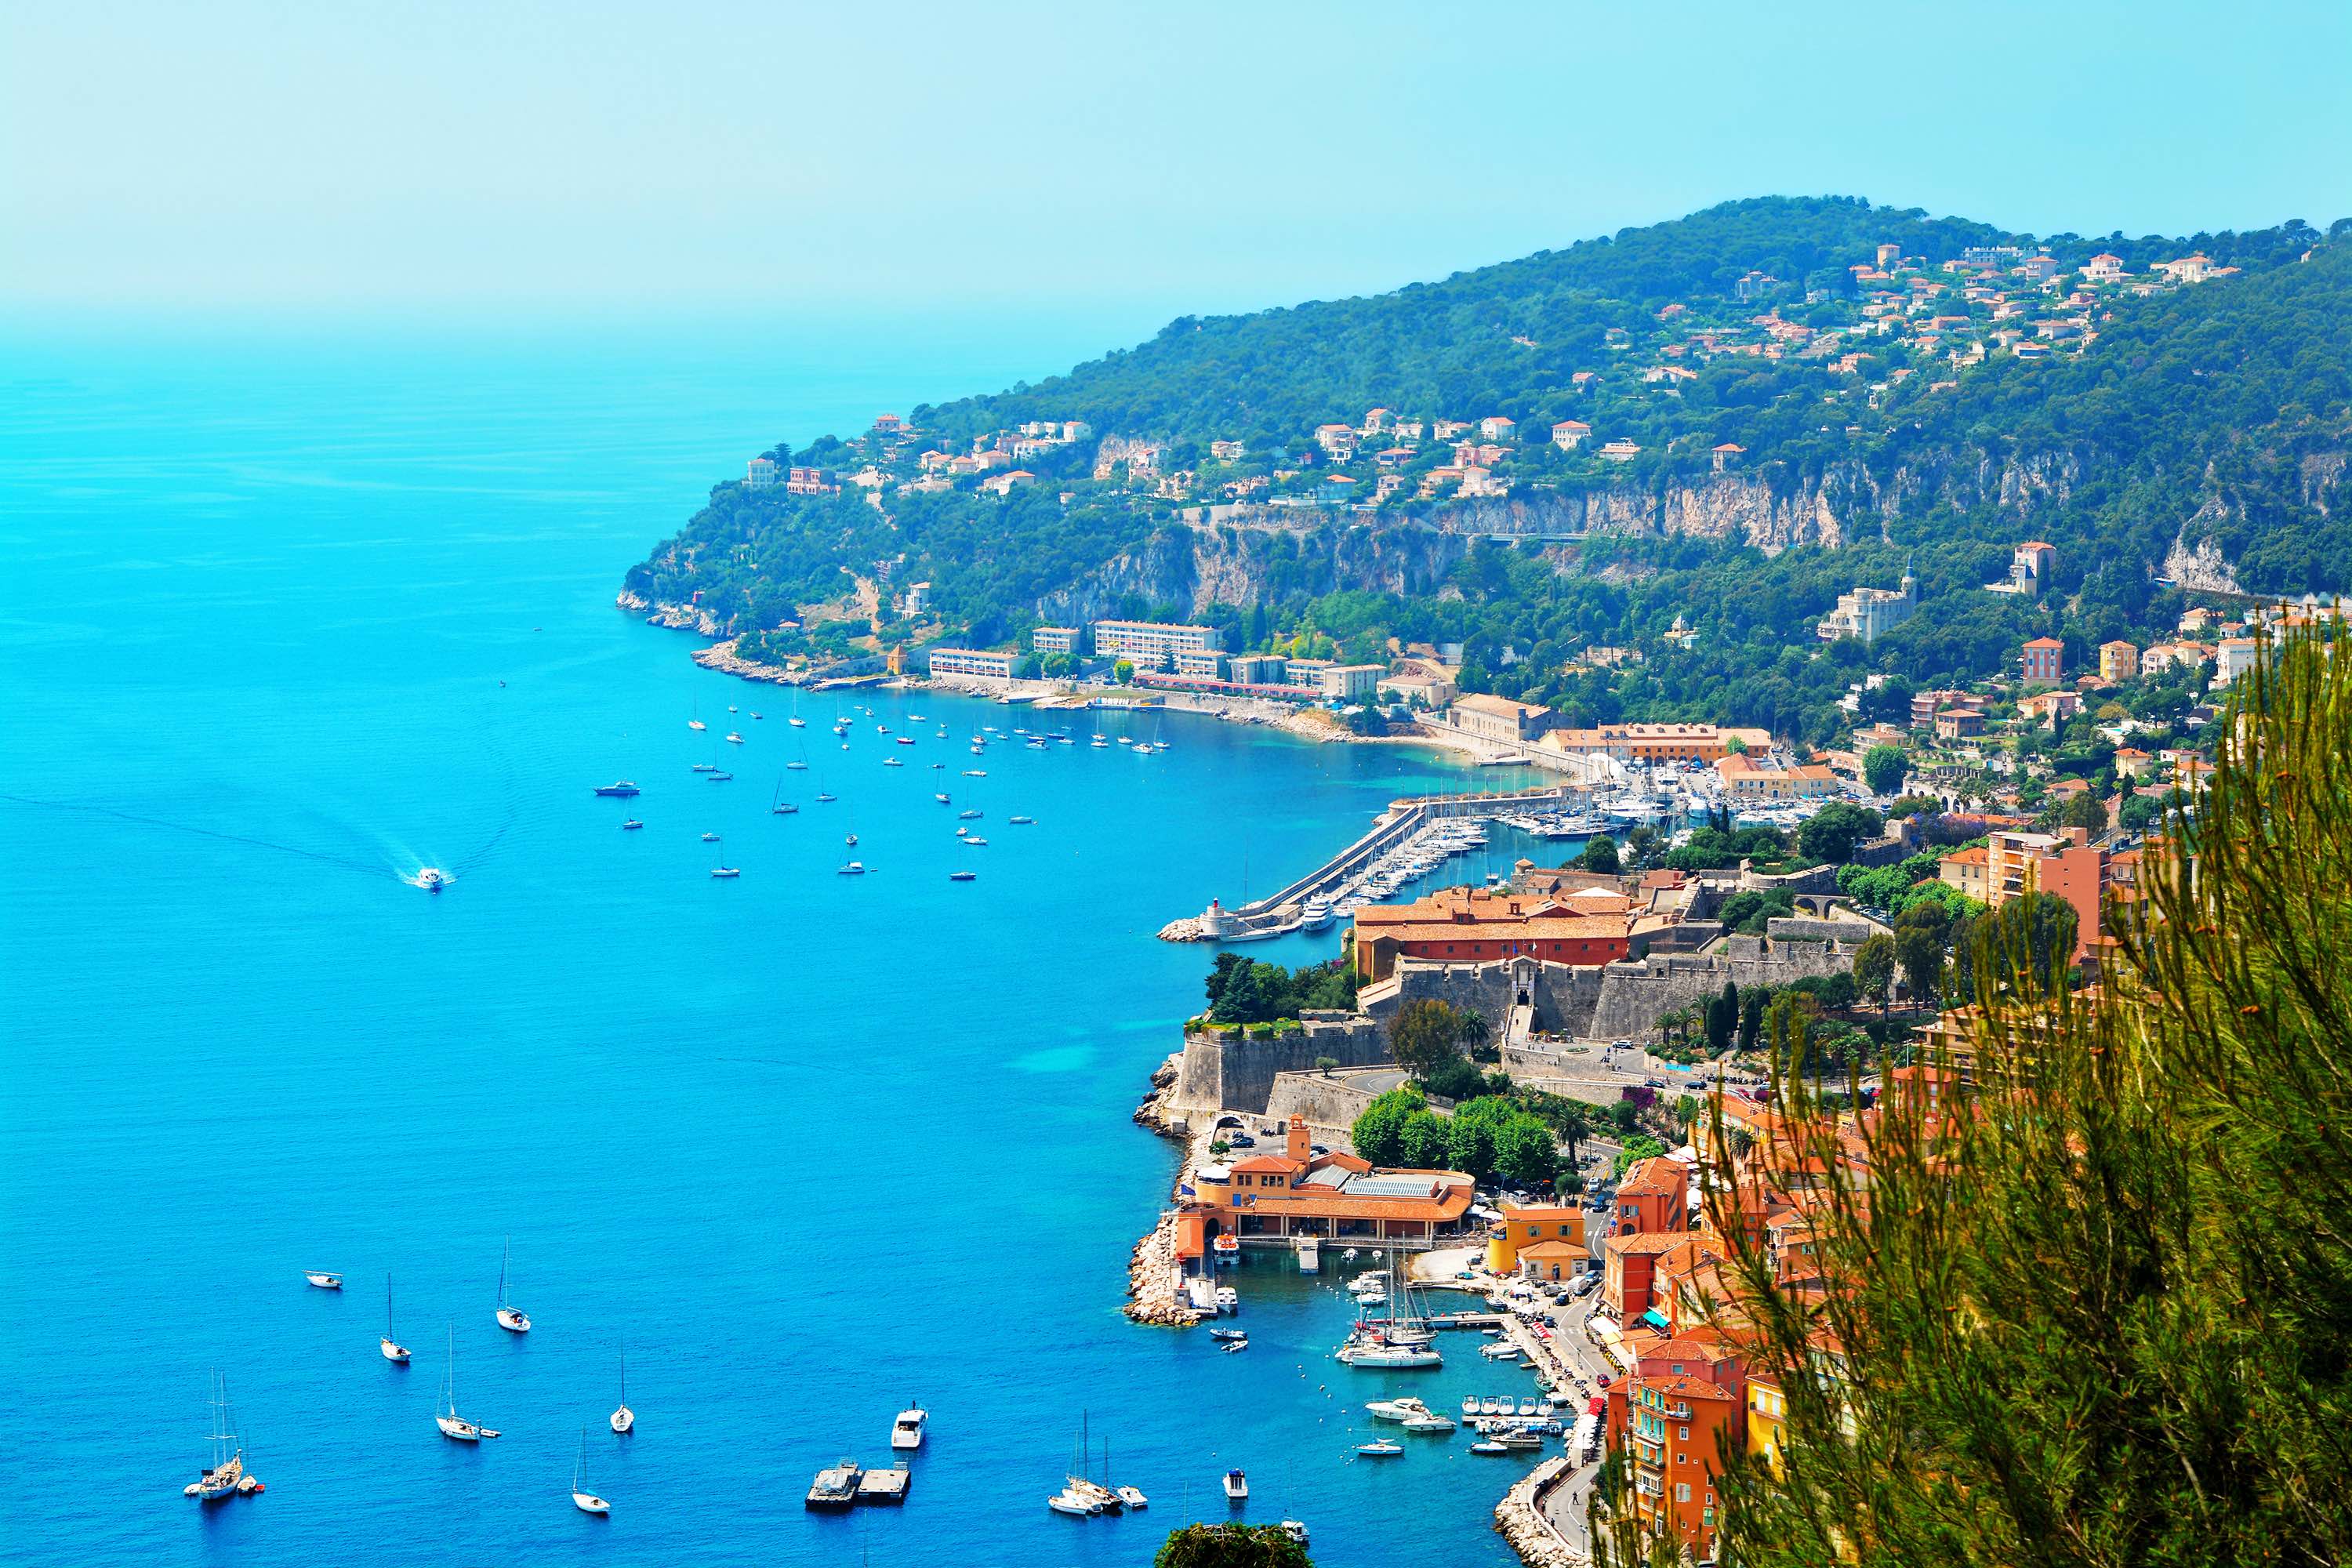 More flights to the French Riviera